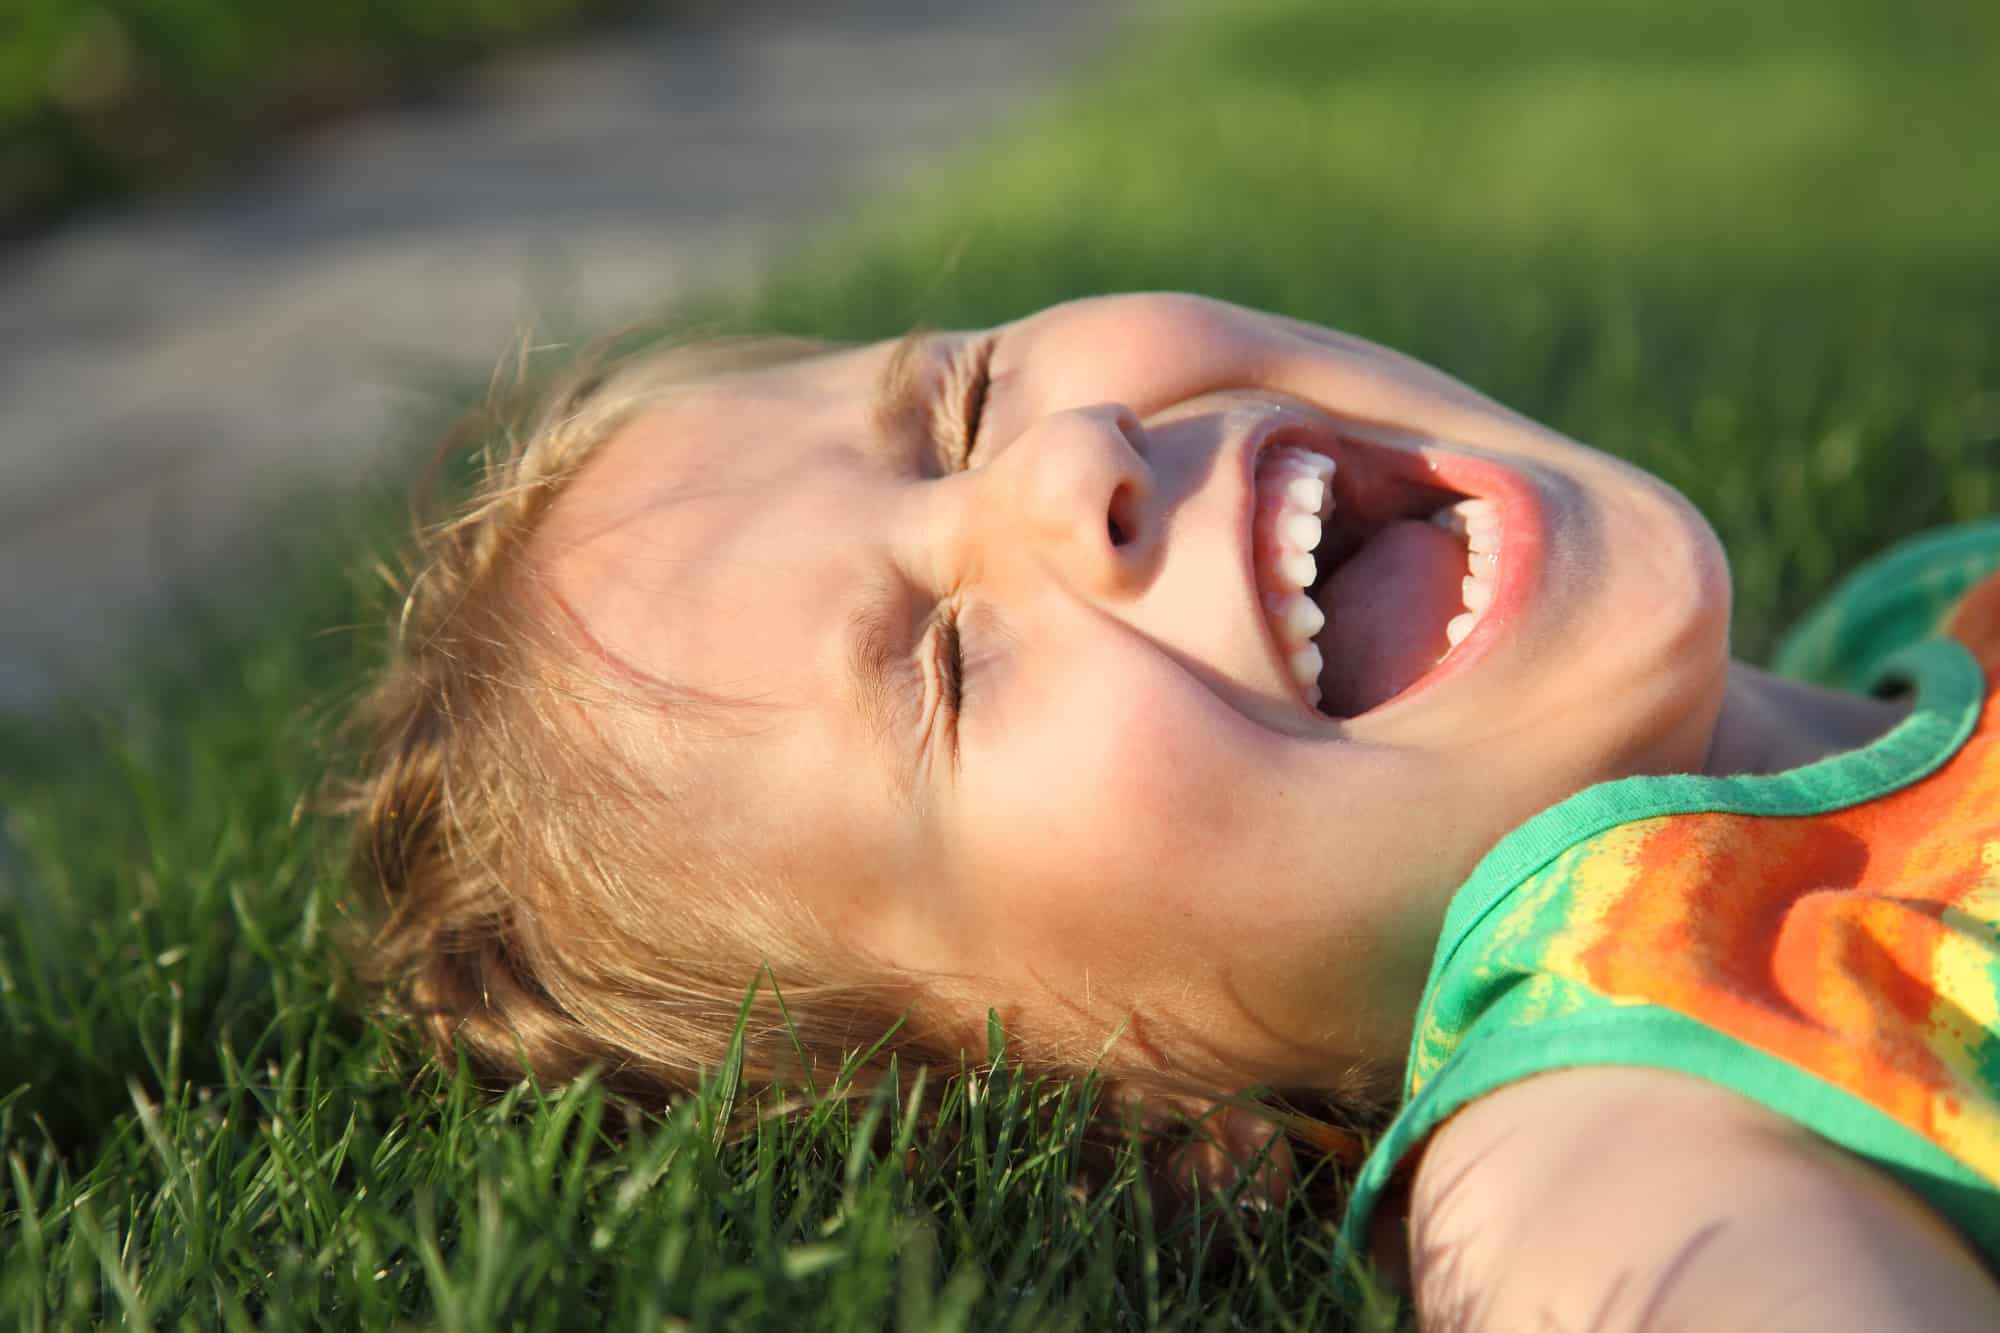 Happy cute girl laughing on a grass field